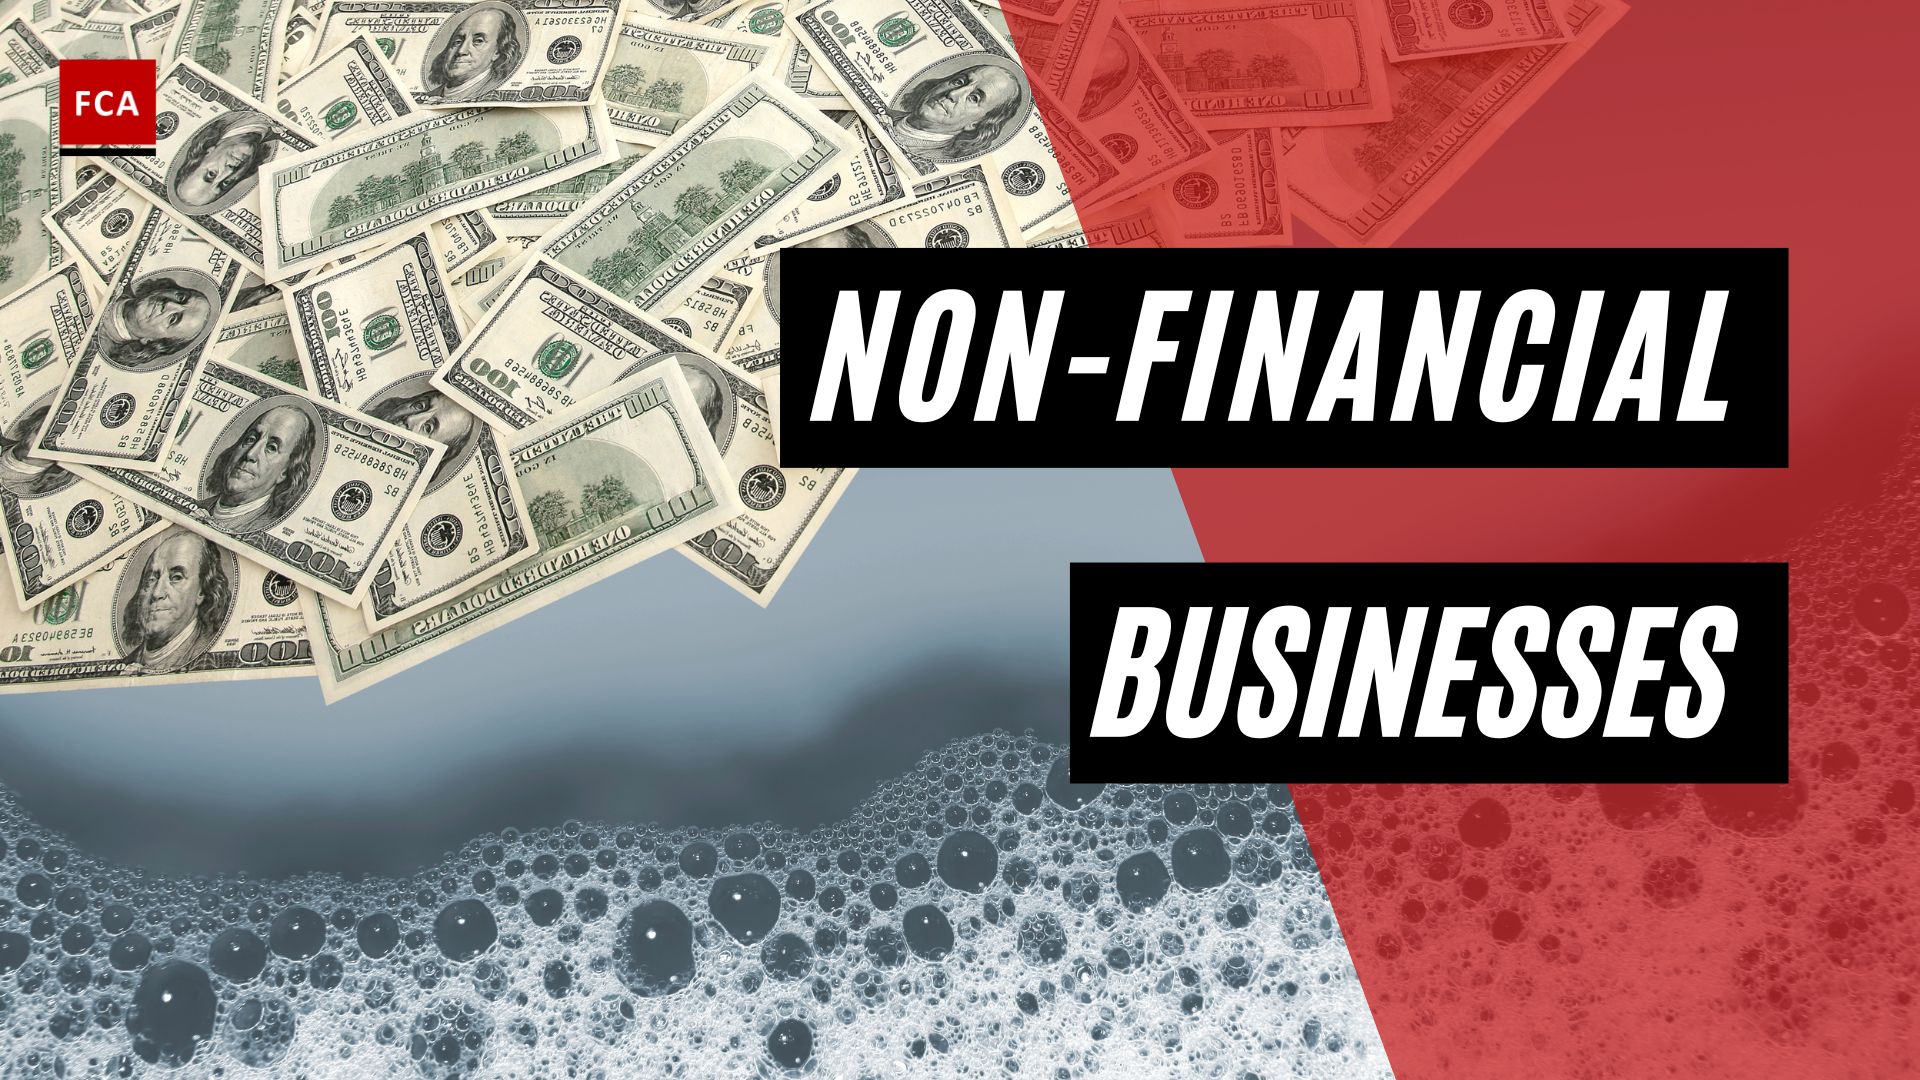 Money Laundering Using Non-Financial Businesses